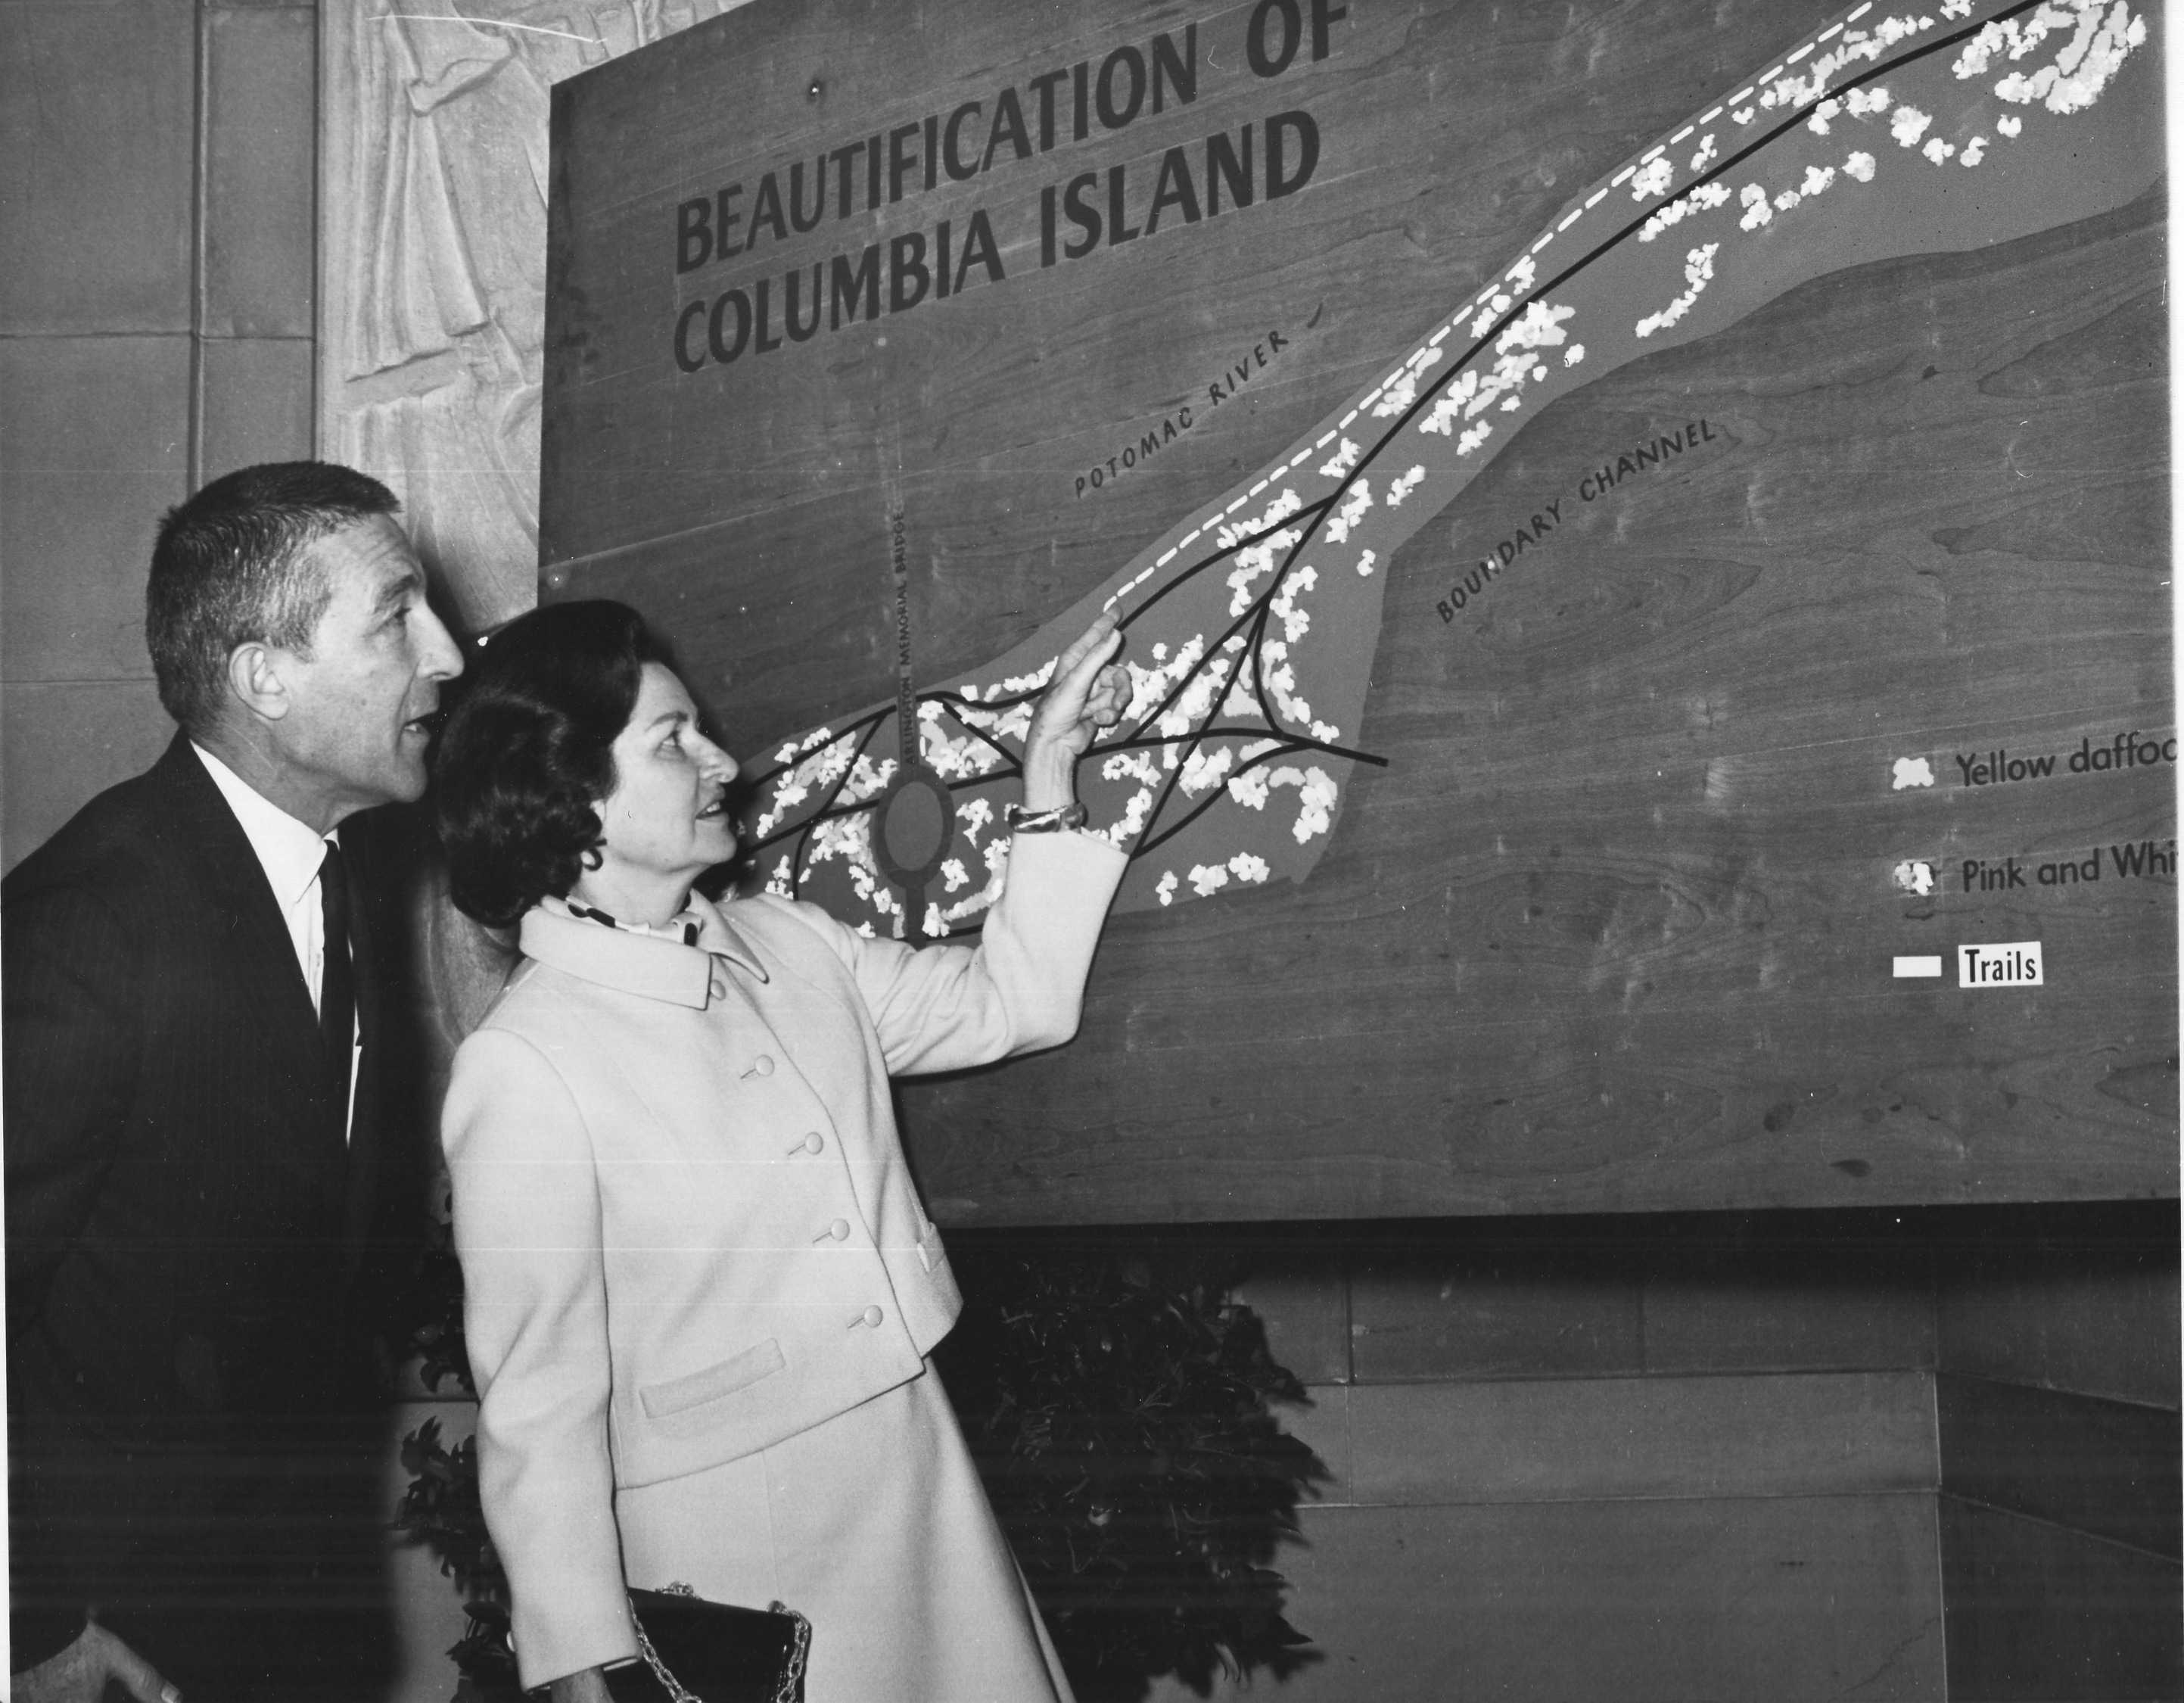 Black and white photo of a well-dressed man and woman pointing to a detail in a large wooden park plan sign, which shows the trails and plants of Columbia Island. 